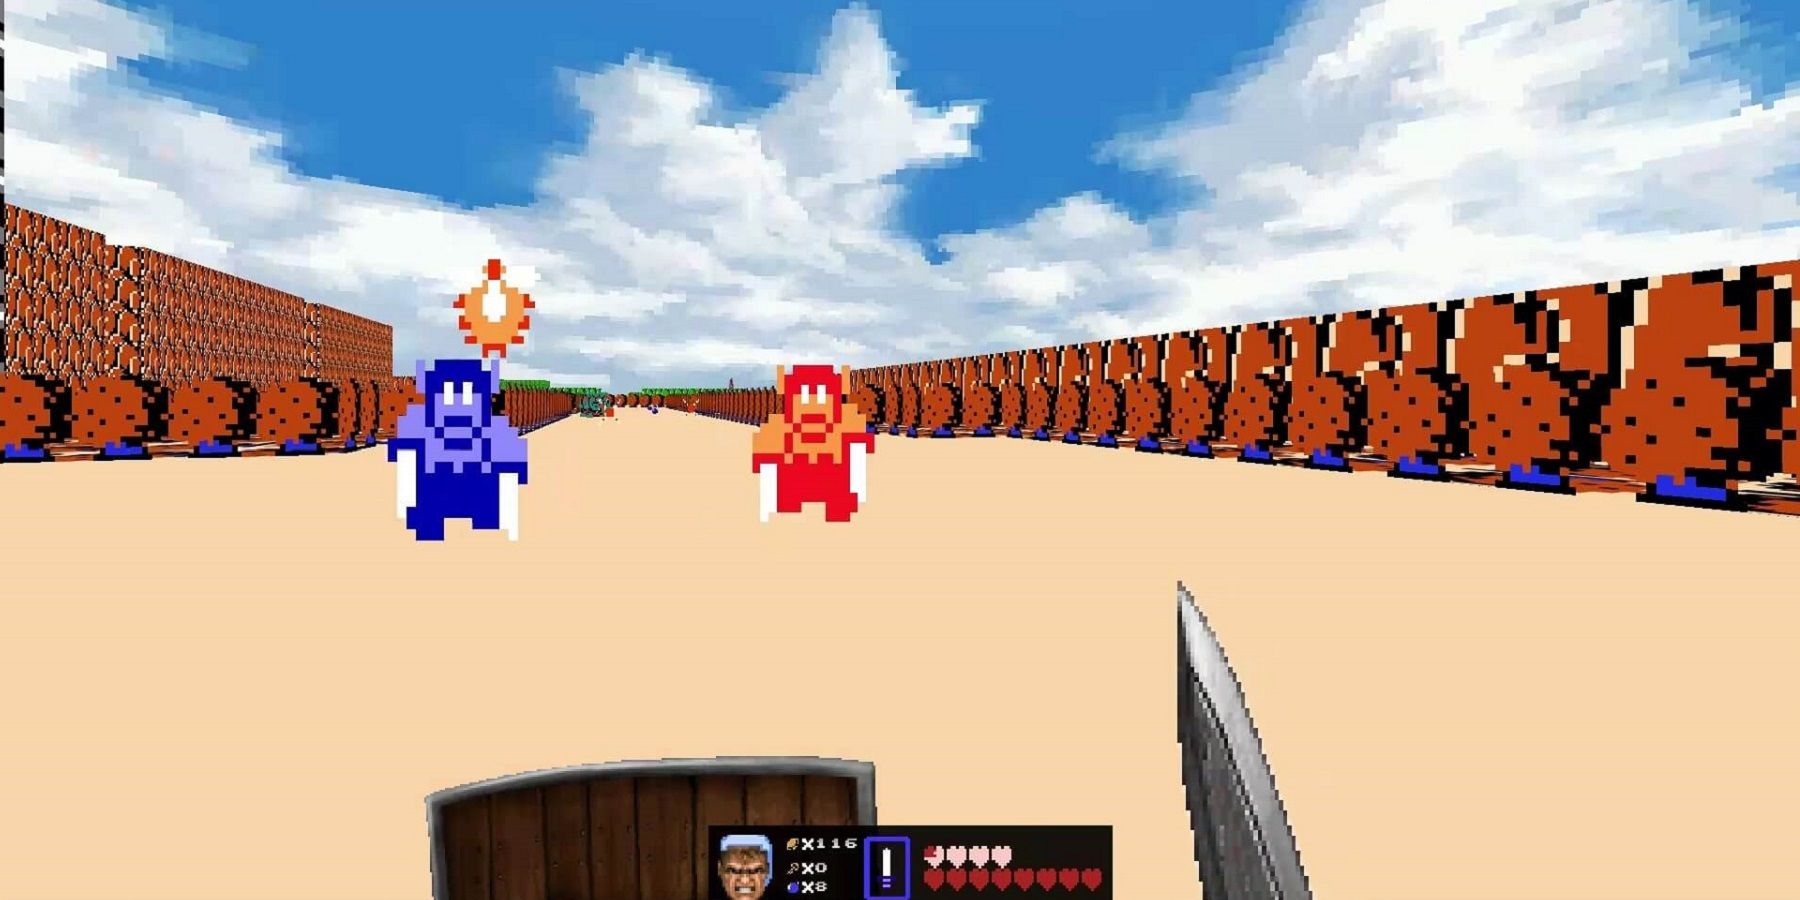 A screenshot from the Doom 2 mod Legend of Doom, showing the player in the kingdom of Hyrule from a first-person perspective.